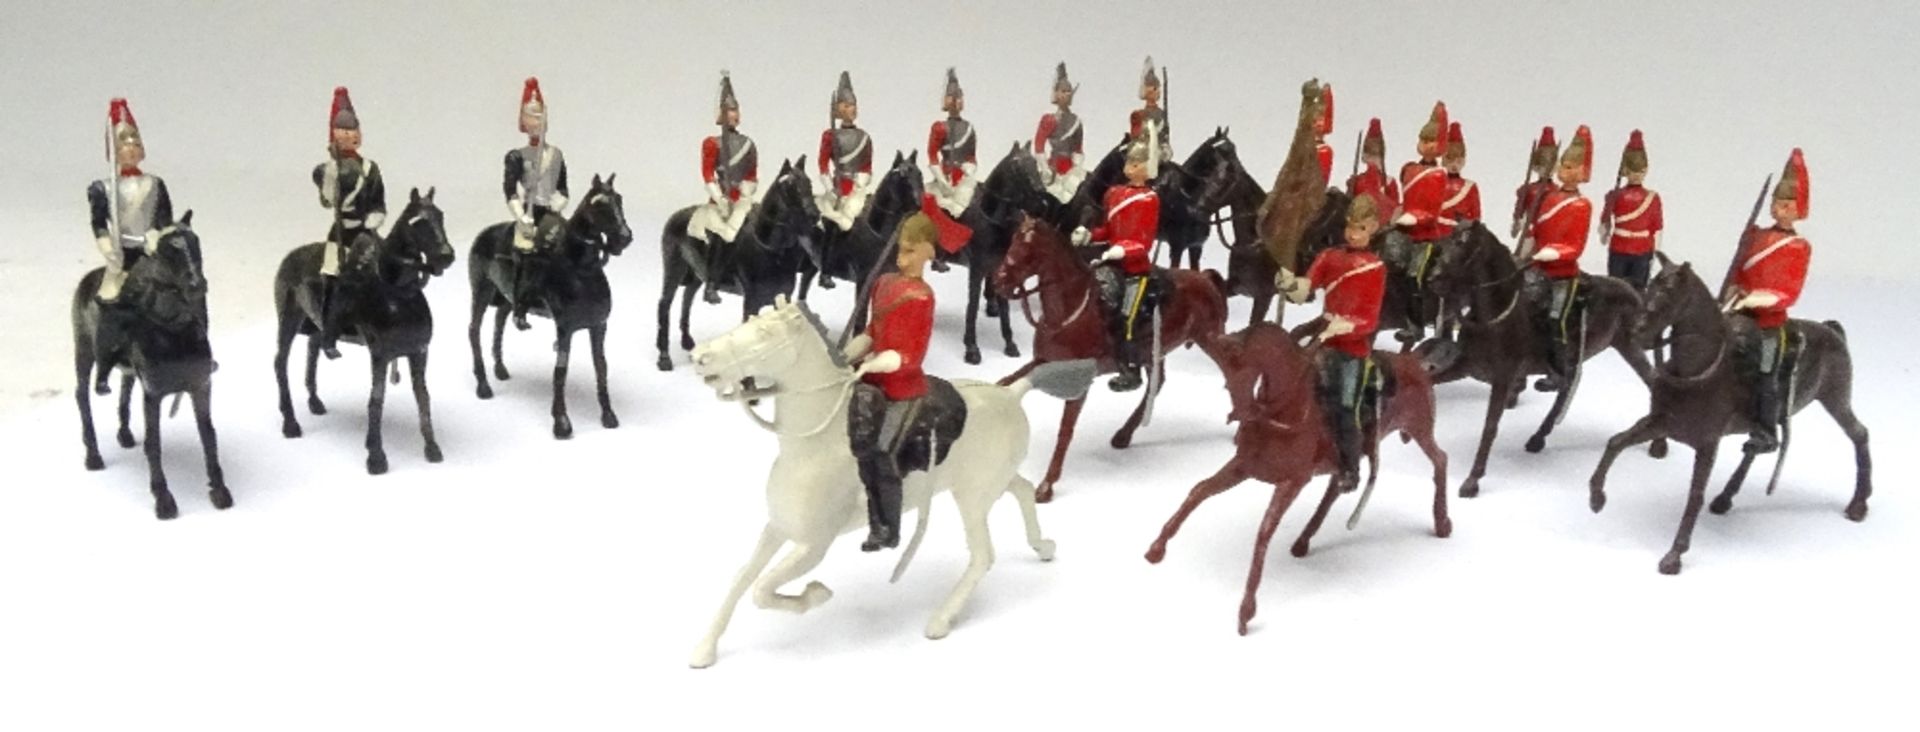 Britains Picture Pack figures - Image 4 of 4